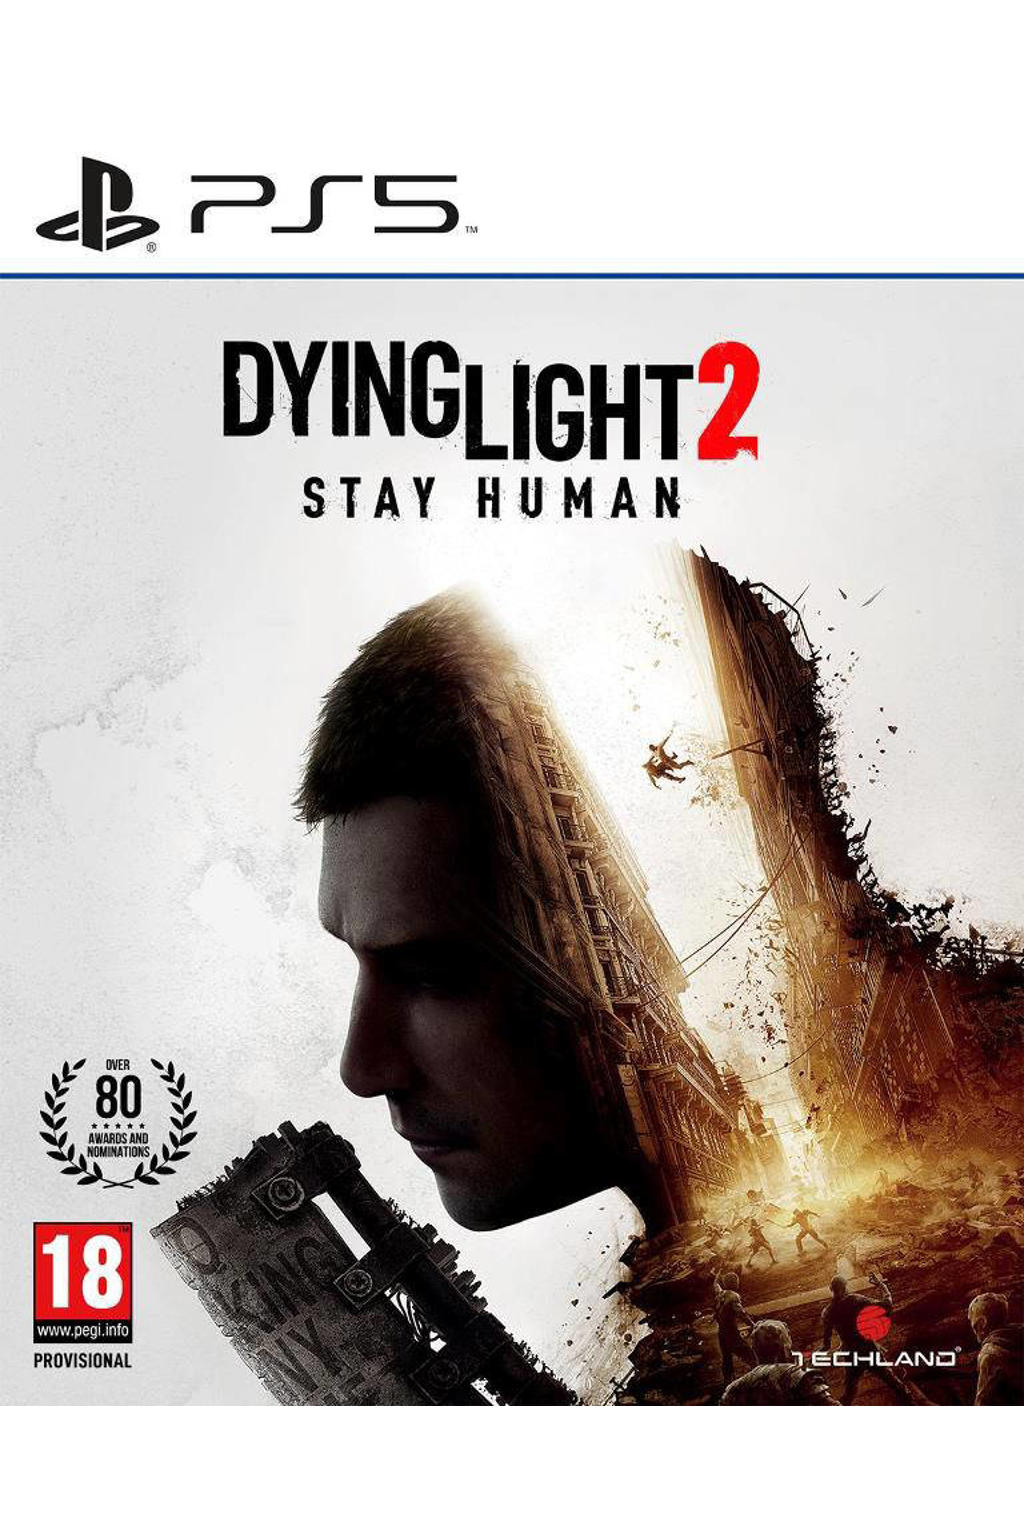 Dying light 2 - Stay human (PlayStation 5)